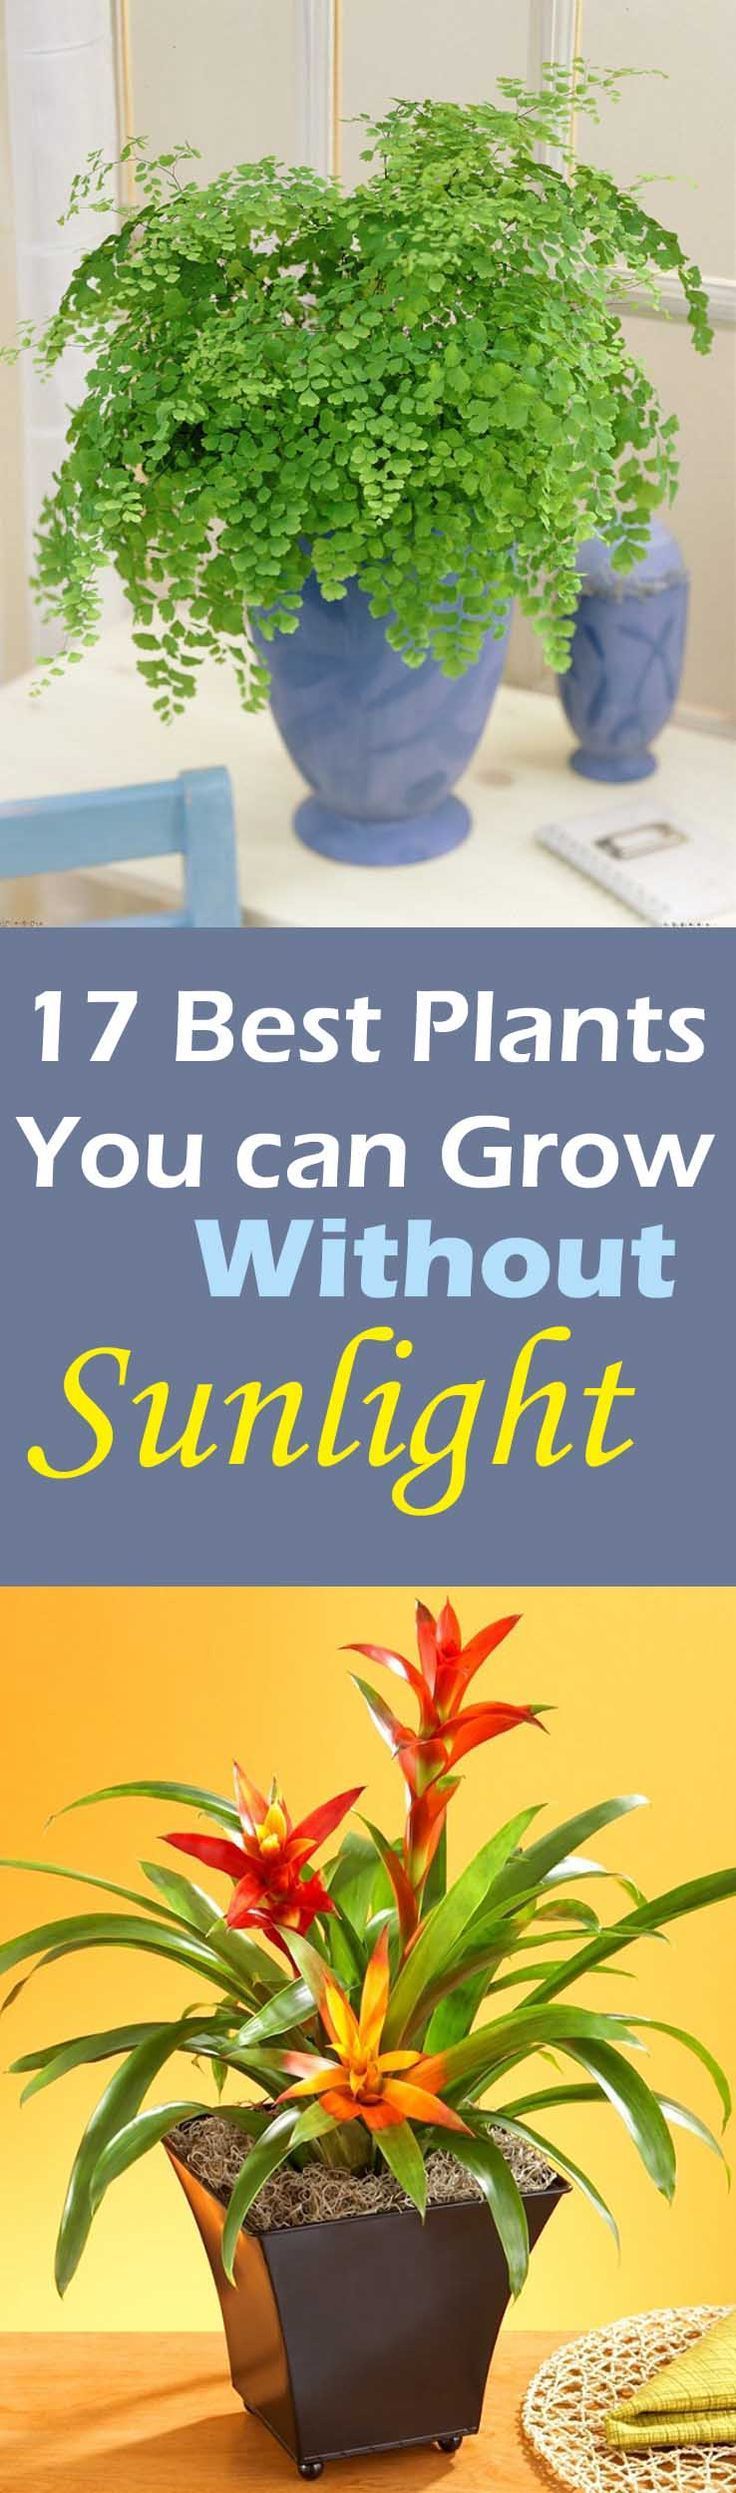 Do you have place in your house that don’t receive direct sun or do you want to grow plants in your living room, dining room or